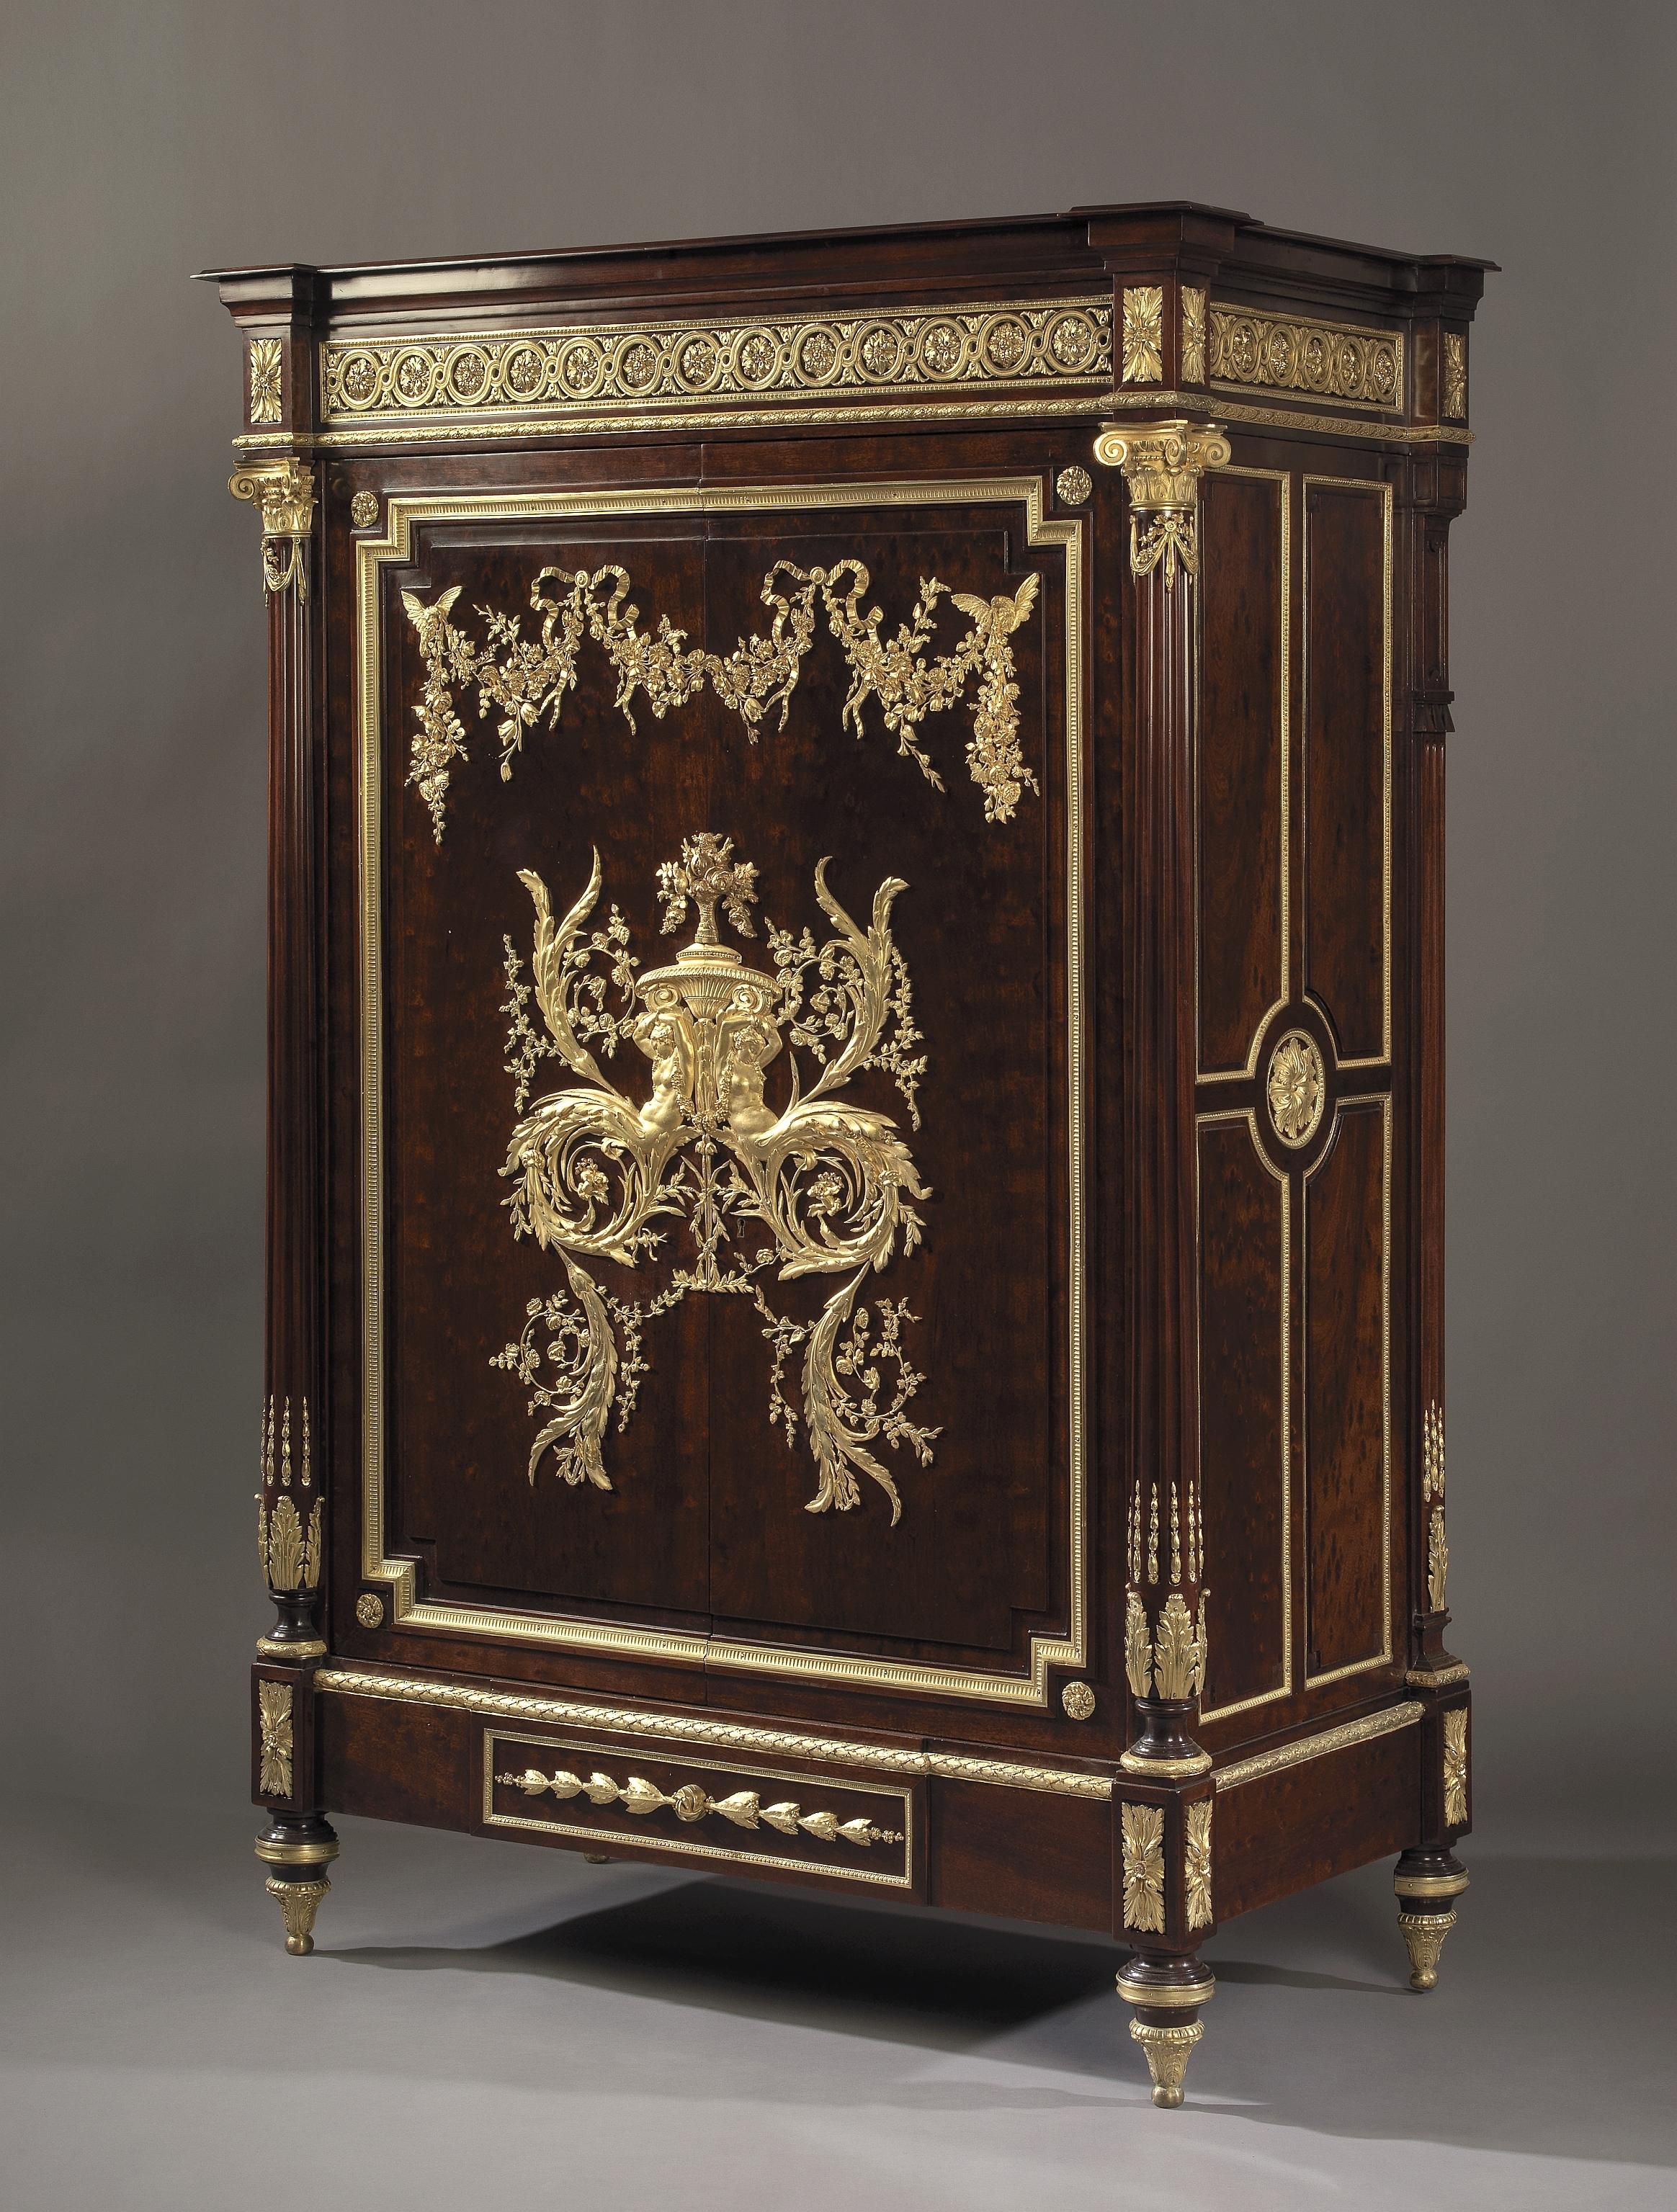 A Louis XVI style gilt bronze-mounted plum-pudding mahogany Bas d’Armoire.

French, circa 1880.

The lock stamped ‘DUBOIS FT A PARIS’. 

This fine cabinet has a rectangular top above a pair of cupboard doors centred by incredible gilt-bronze